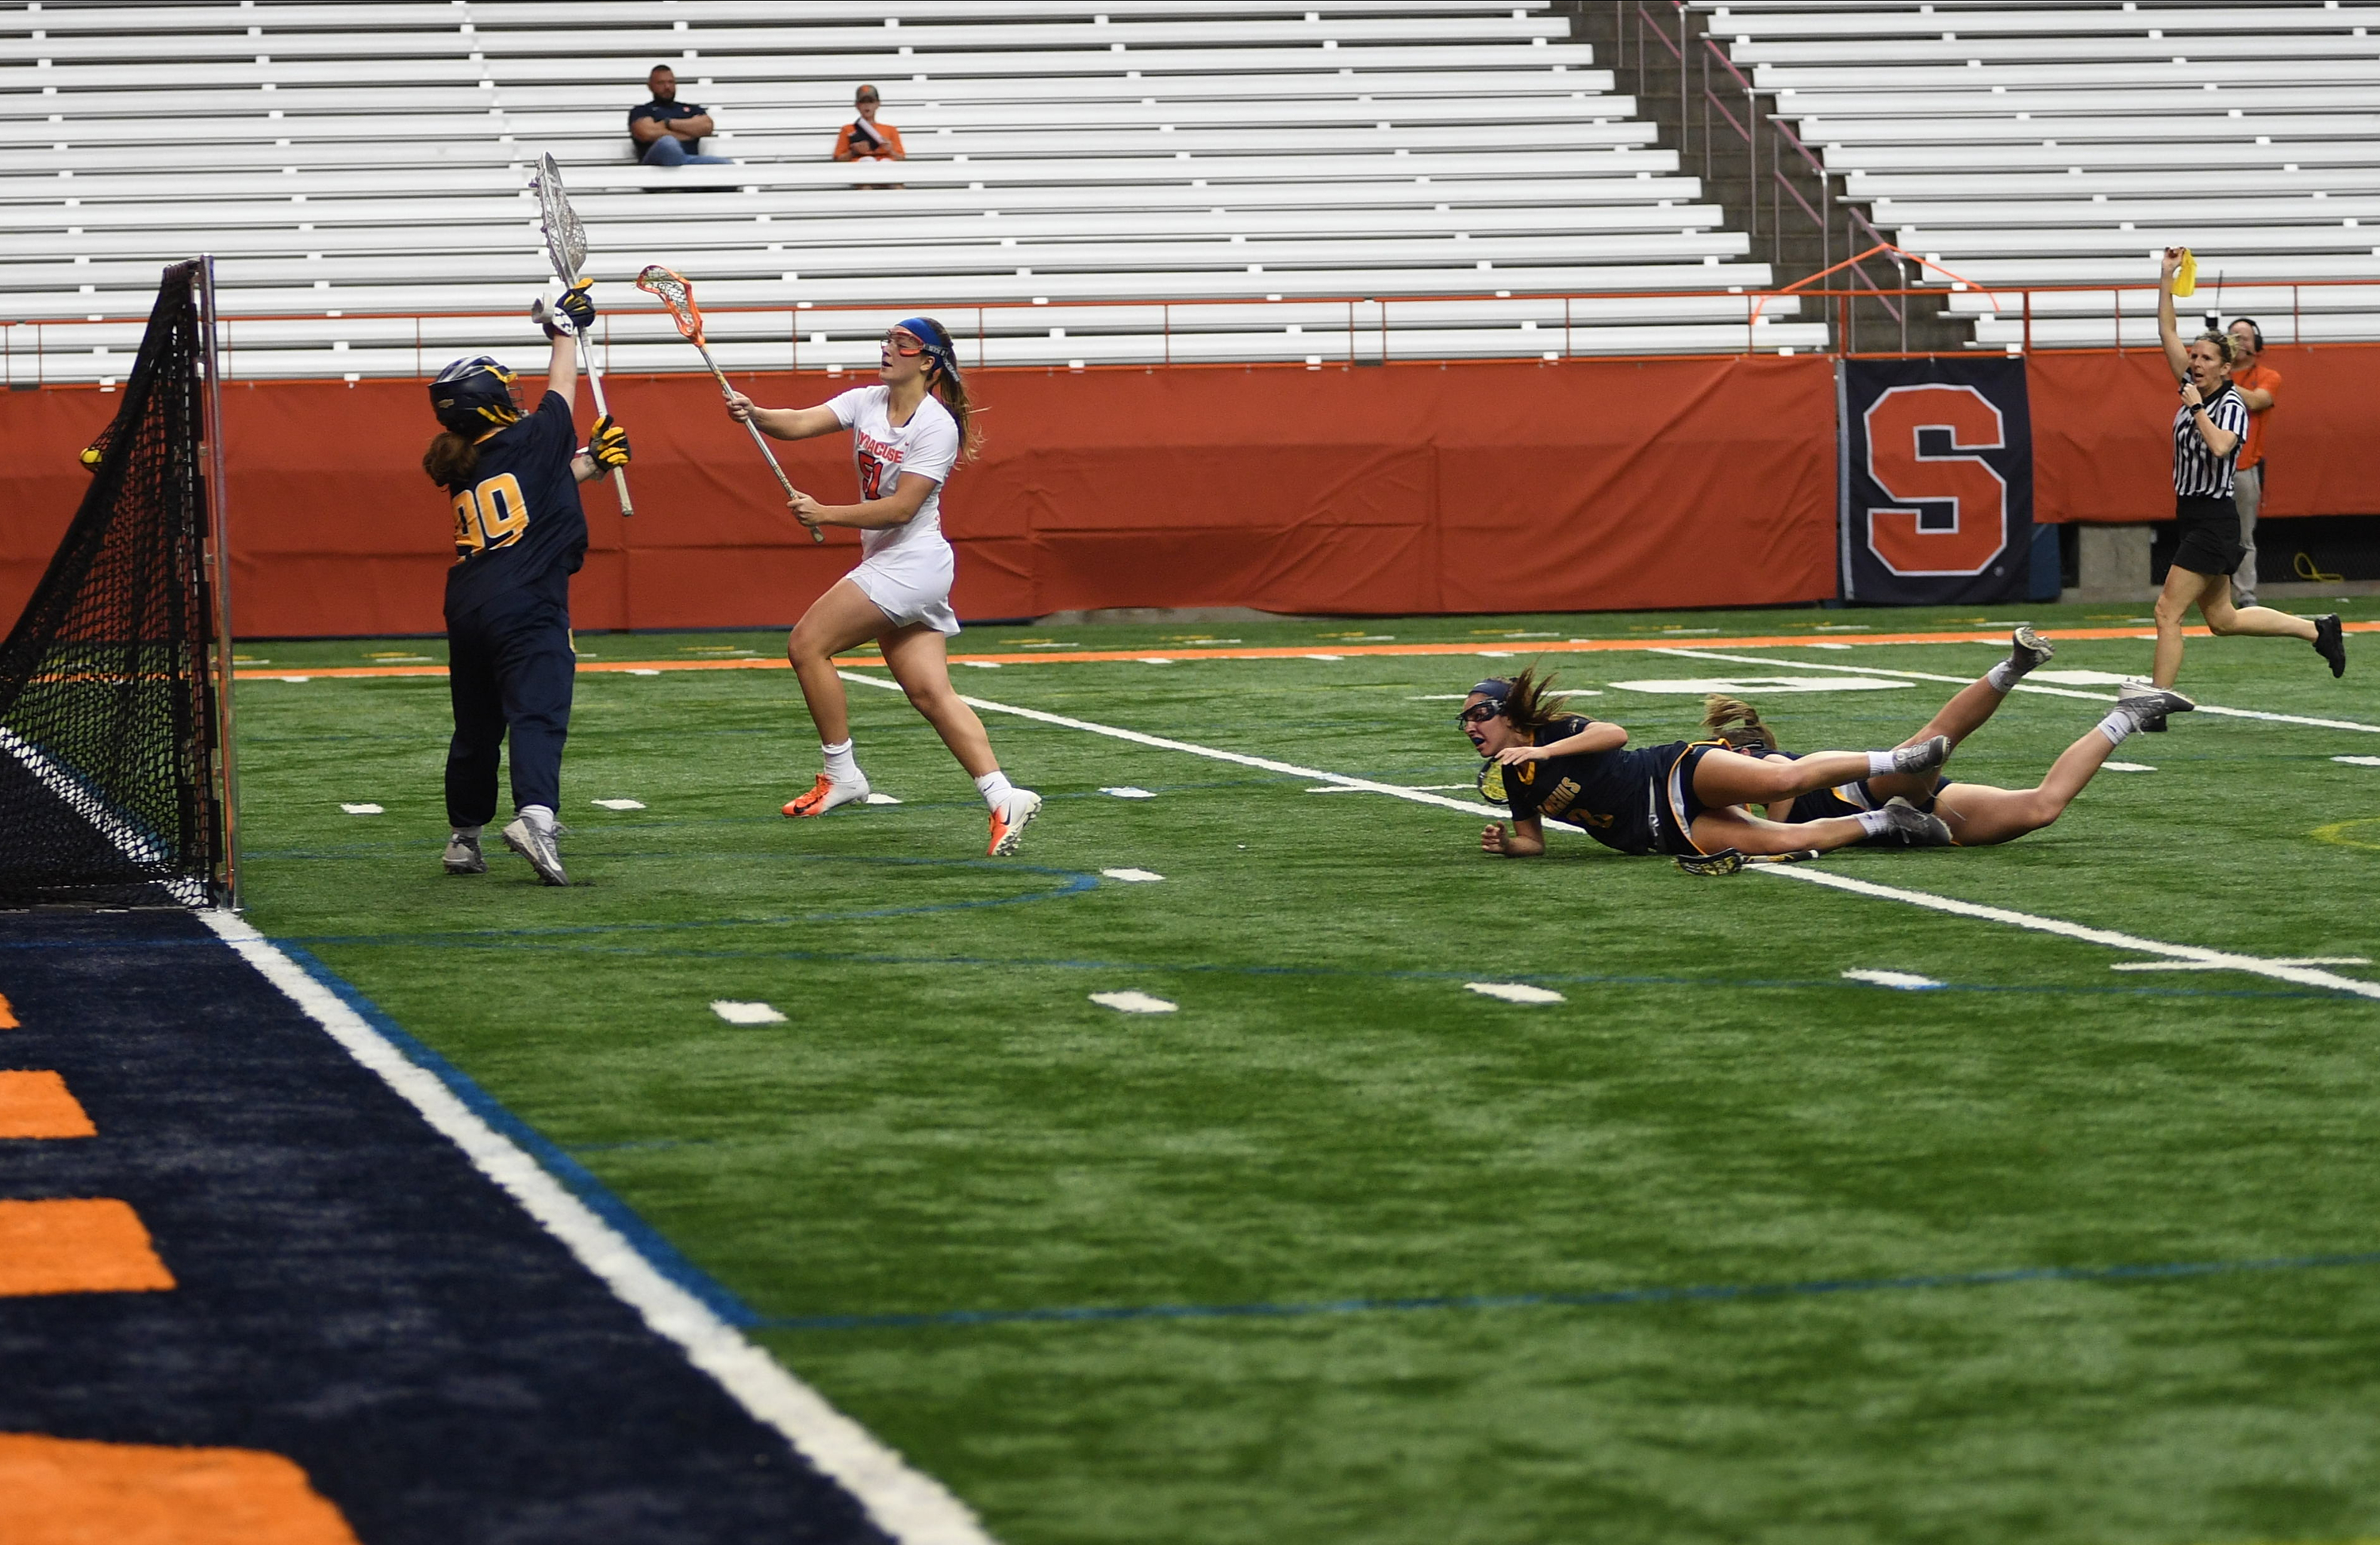 Emily Hawryschuk scores one of her seven goals during the game at the Carrier Dome on Feb. 7, 2020.